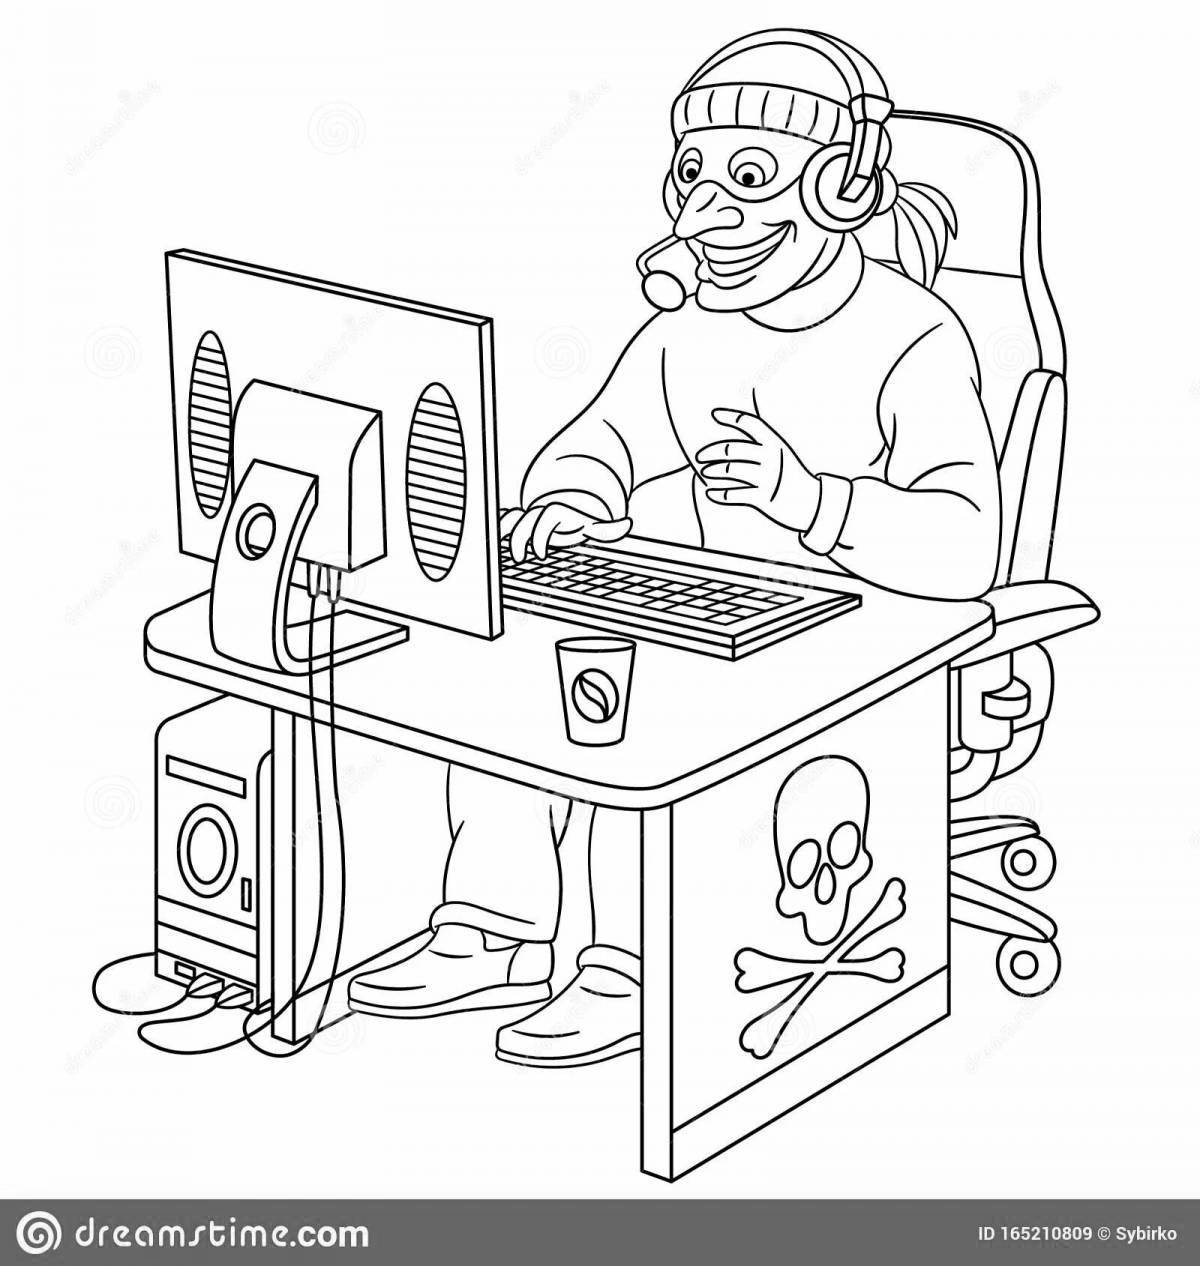 Color-frenzy programmer coloring page